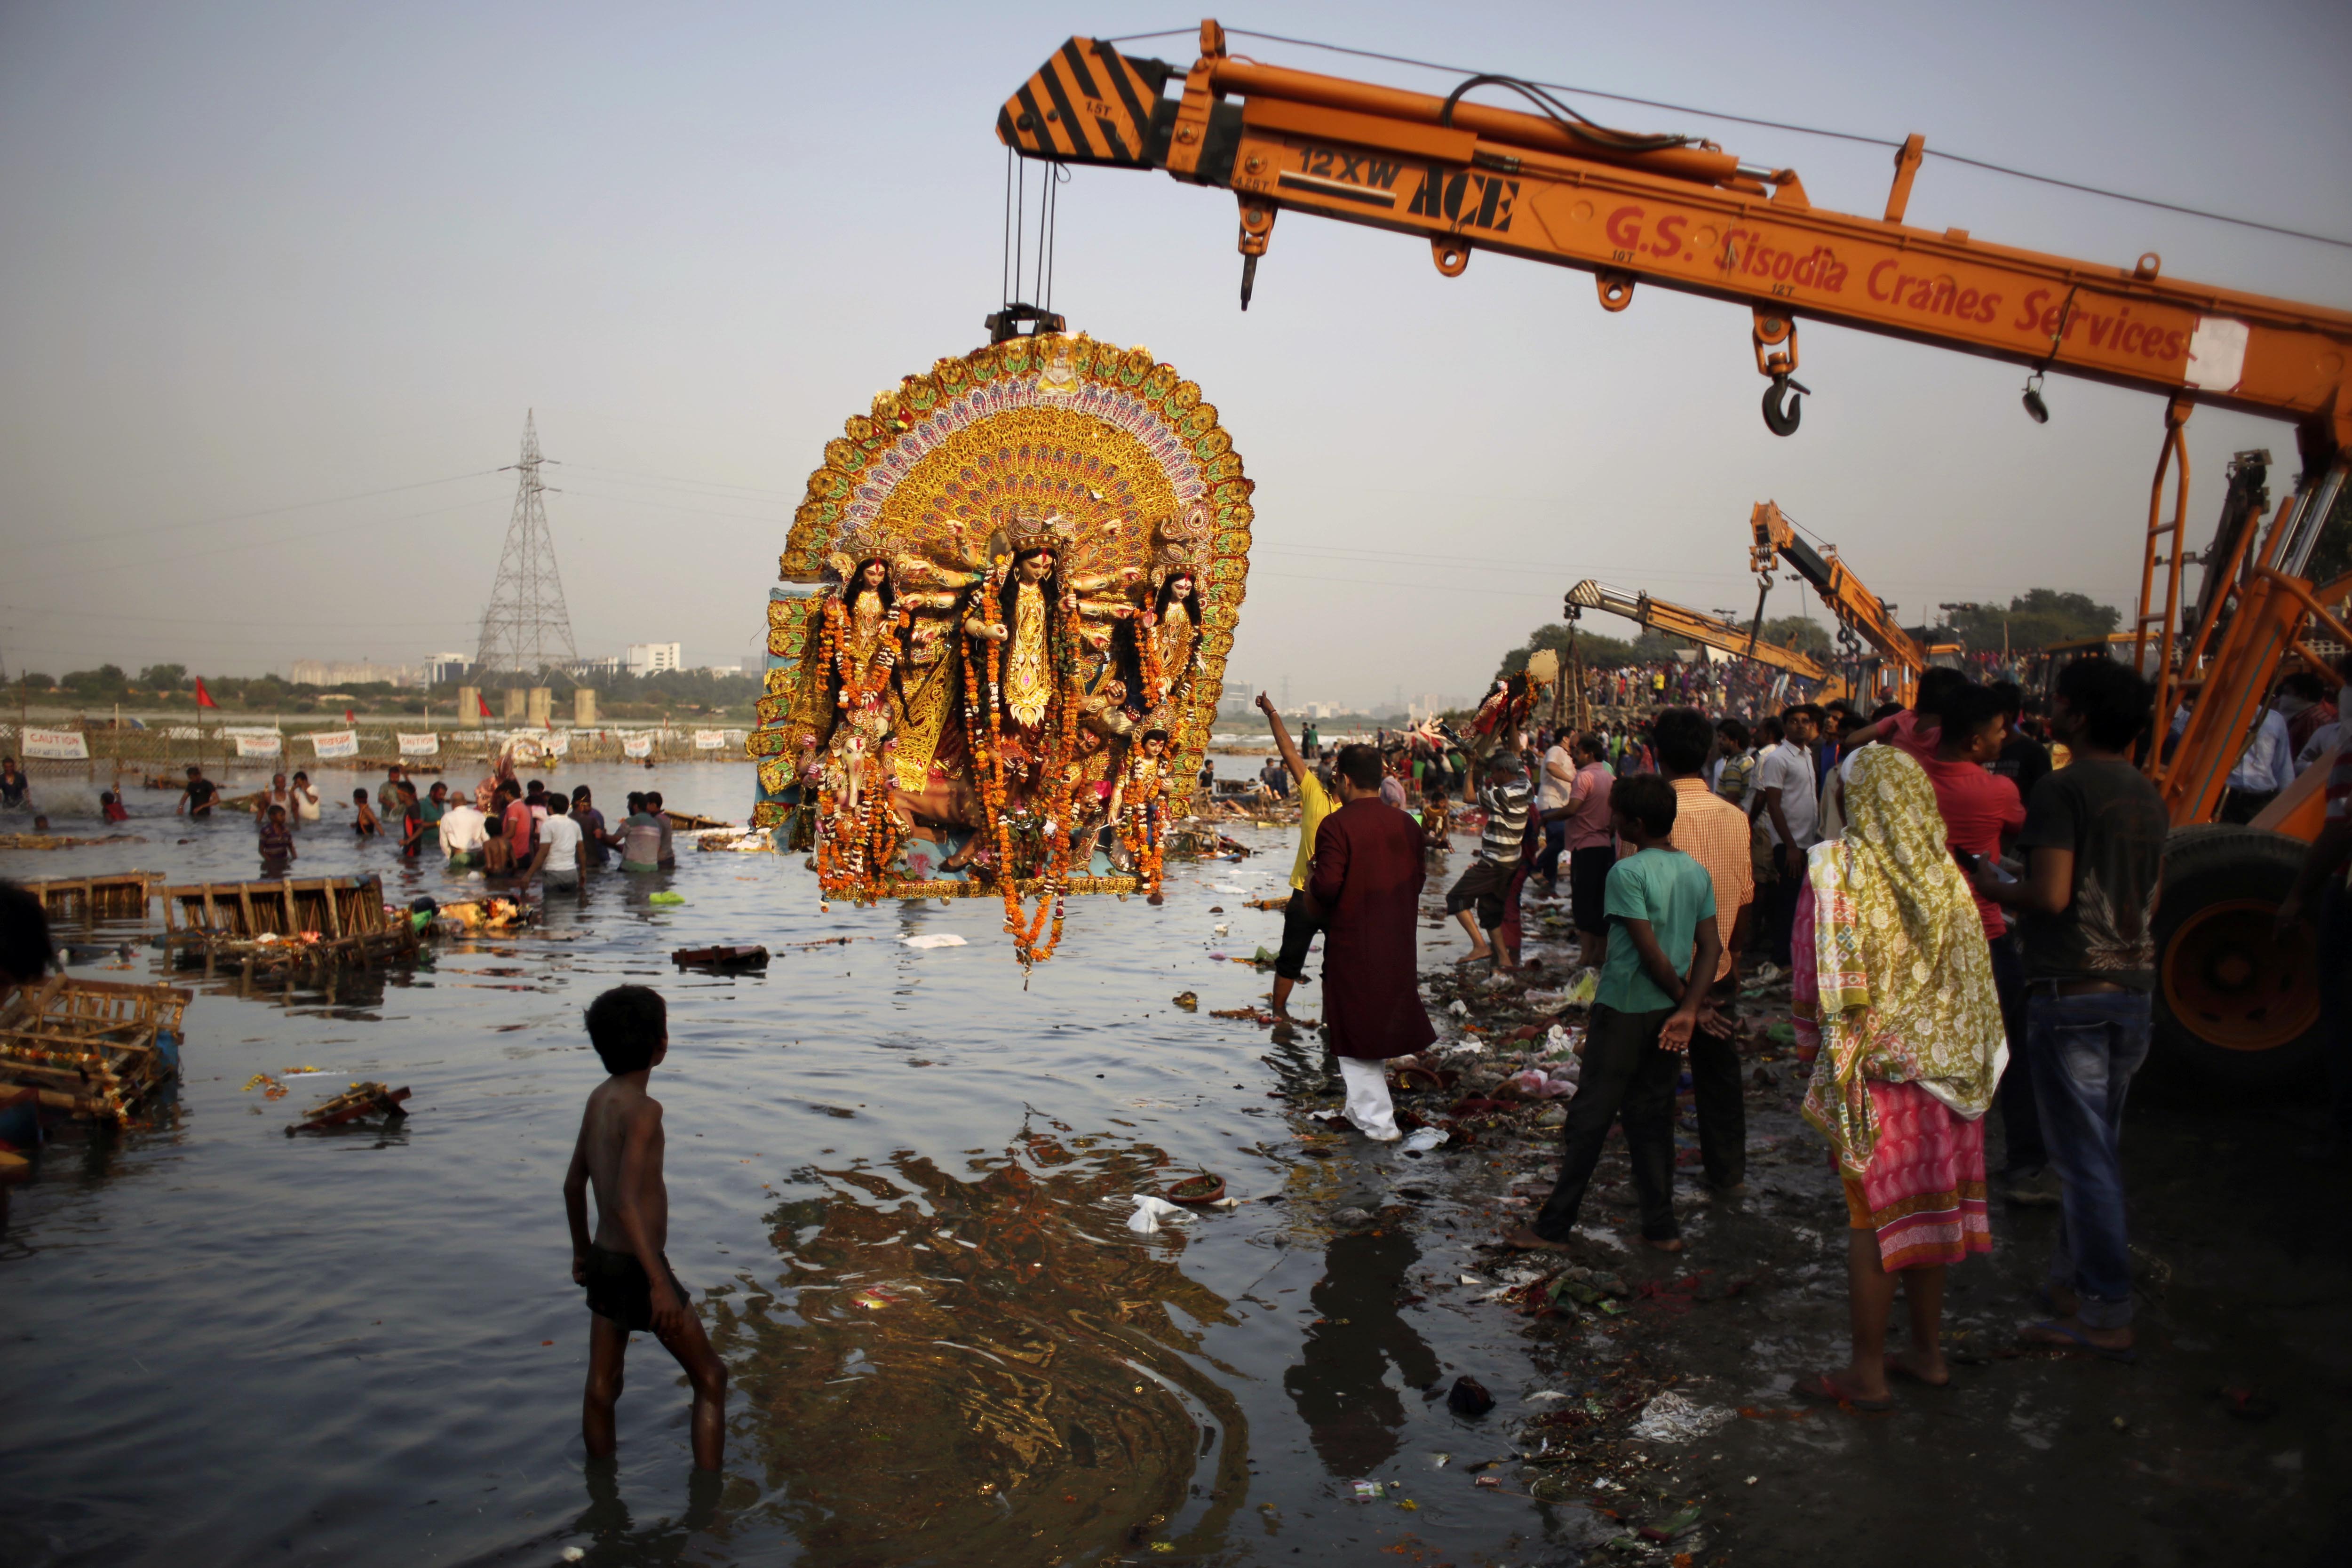 FILE- In this Tuesday, Oct. 11, 2016 file photo, a giant Idol of Hindu goddess Durga suspends from a crane before it is immersed in the River Yamuna during Durga Puja festival in New Delhi, India. A court in northern India has granted the same legal rights as a human to the Ganges and Yamuna rivers, considered sacred by nearly a billion Indians. The Uttaranchal High Court in Uttarakhand state ruled Monday, March 20, 2017,  that the two rivers be accorded the status of living human entities, meaning that if anyone harms or pollutes the rivers, the law would view it as no different from harming a person. (AP Photo/Altaf Qadri, File)